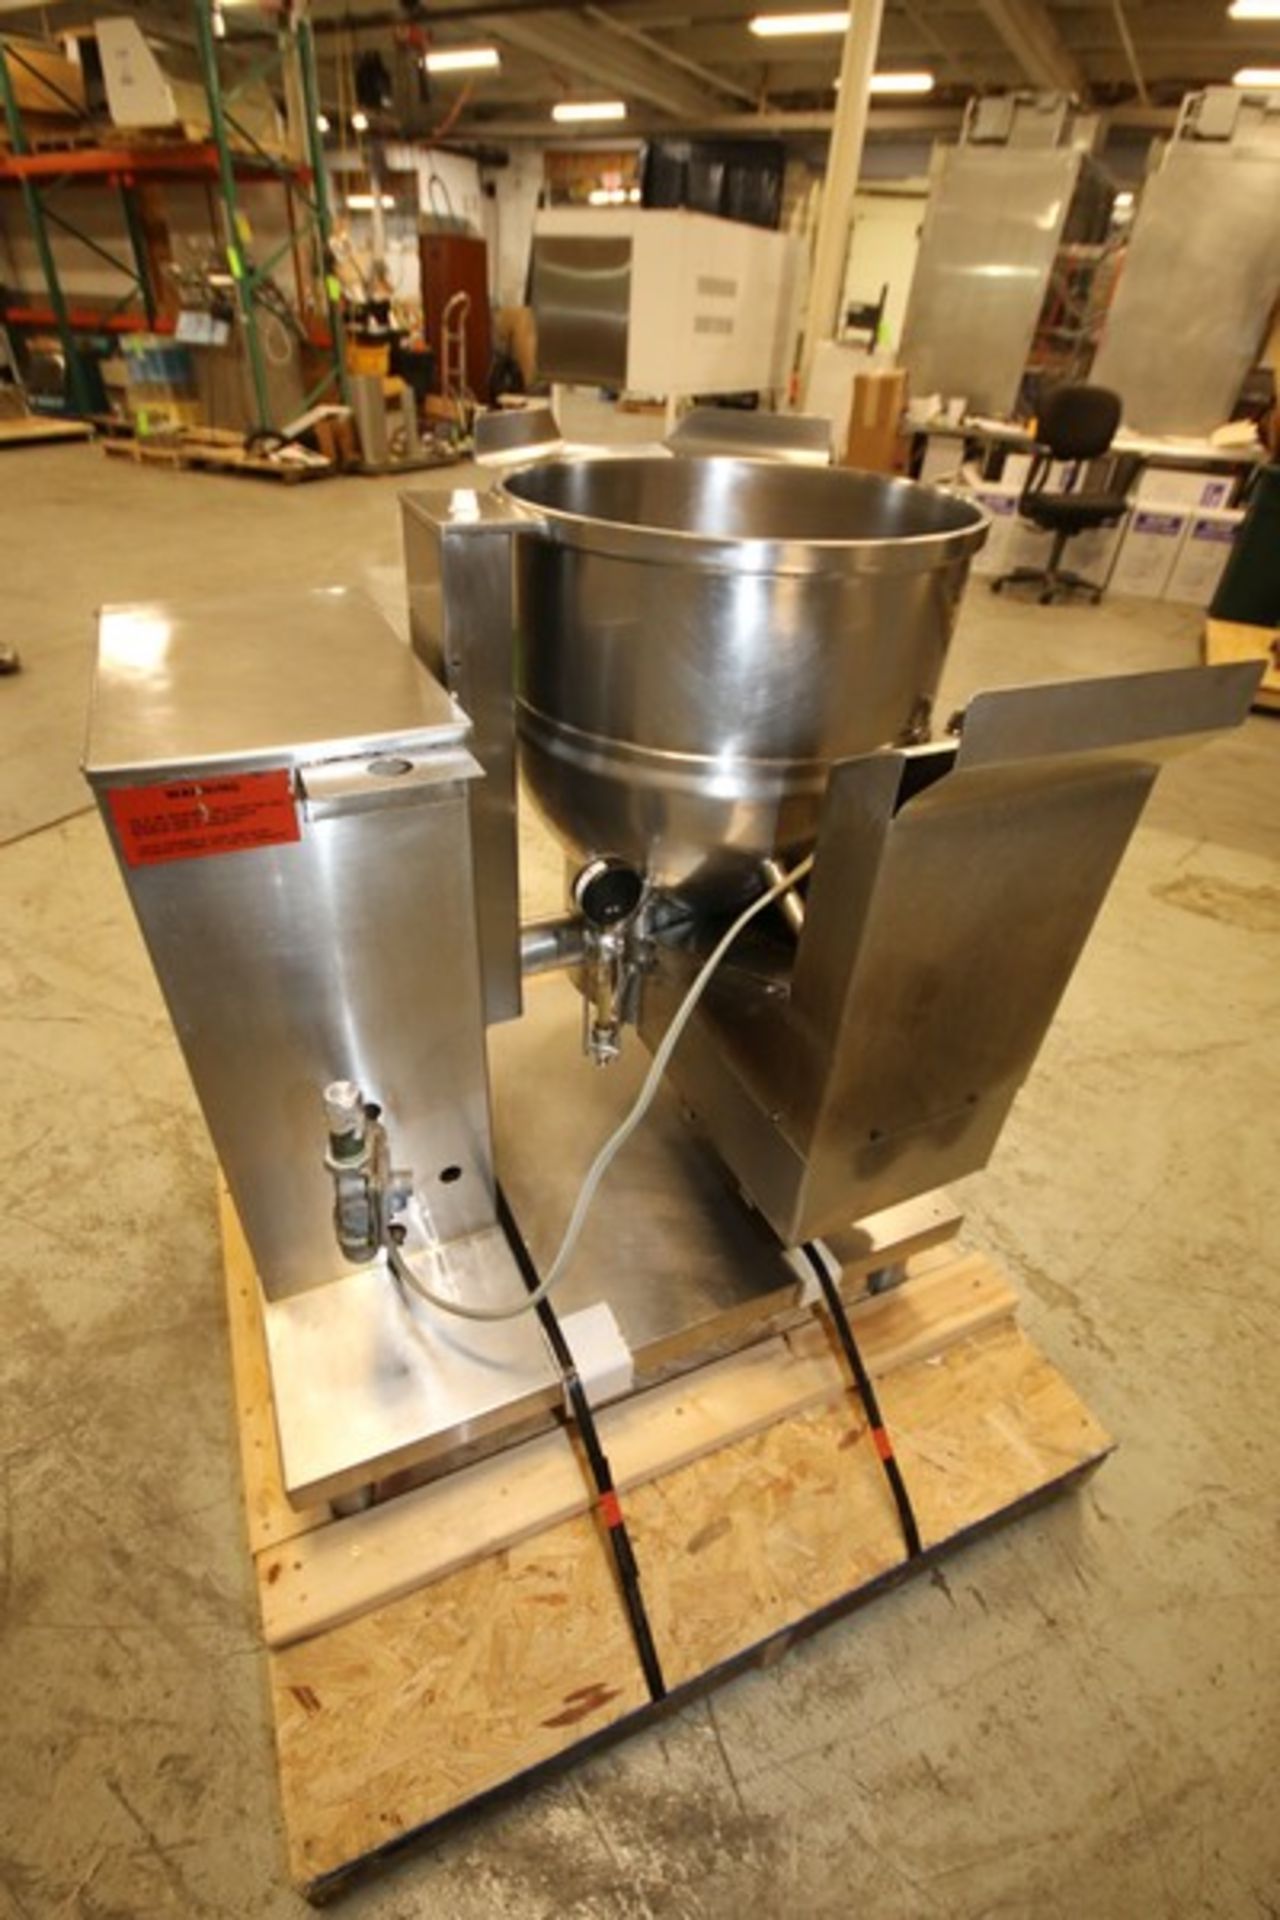 Groen 20 Gallon Jacketed S/S Tilt Kettle, Model DH-20, SN 124923, 115V, Propane Gas, Max W.P. 50 psi - Image 5 of 8